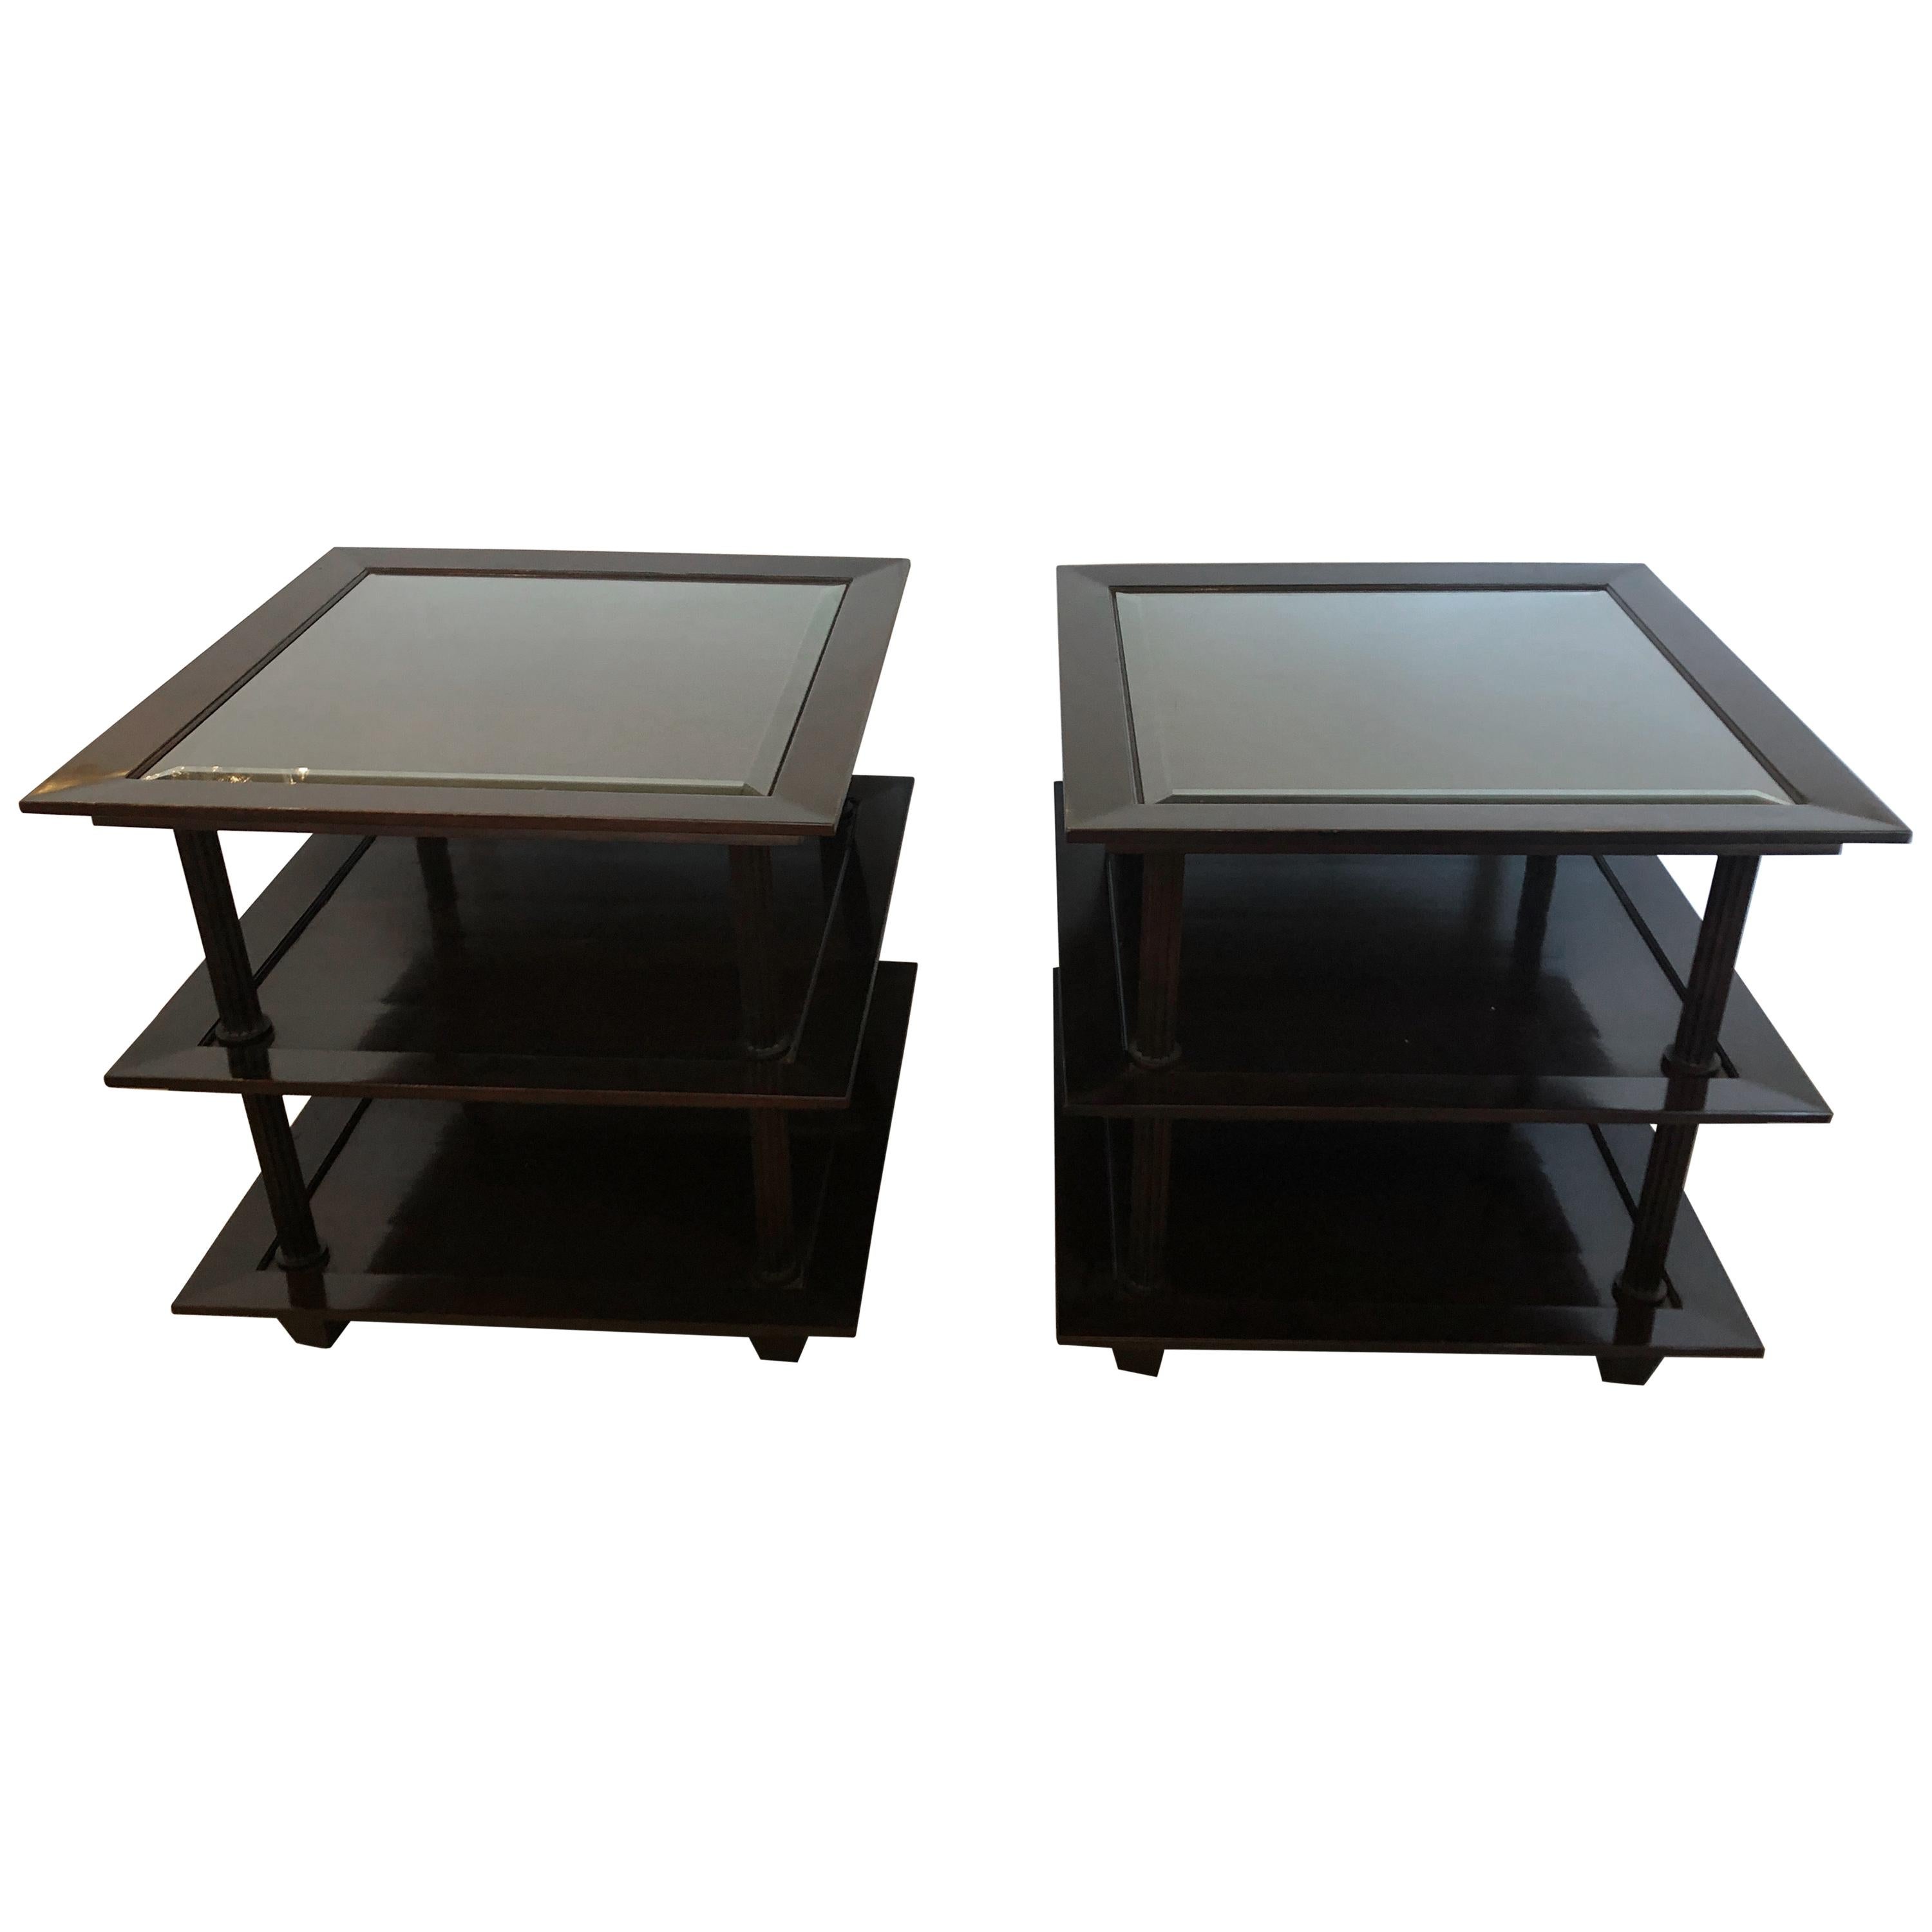 Sophisticated Pair of Barbara Barry 3-Tier Side Tables with Java Finish